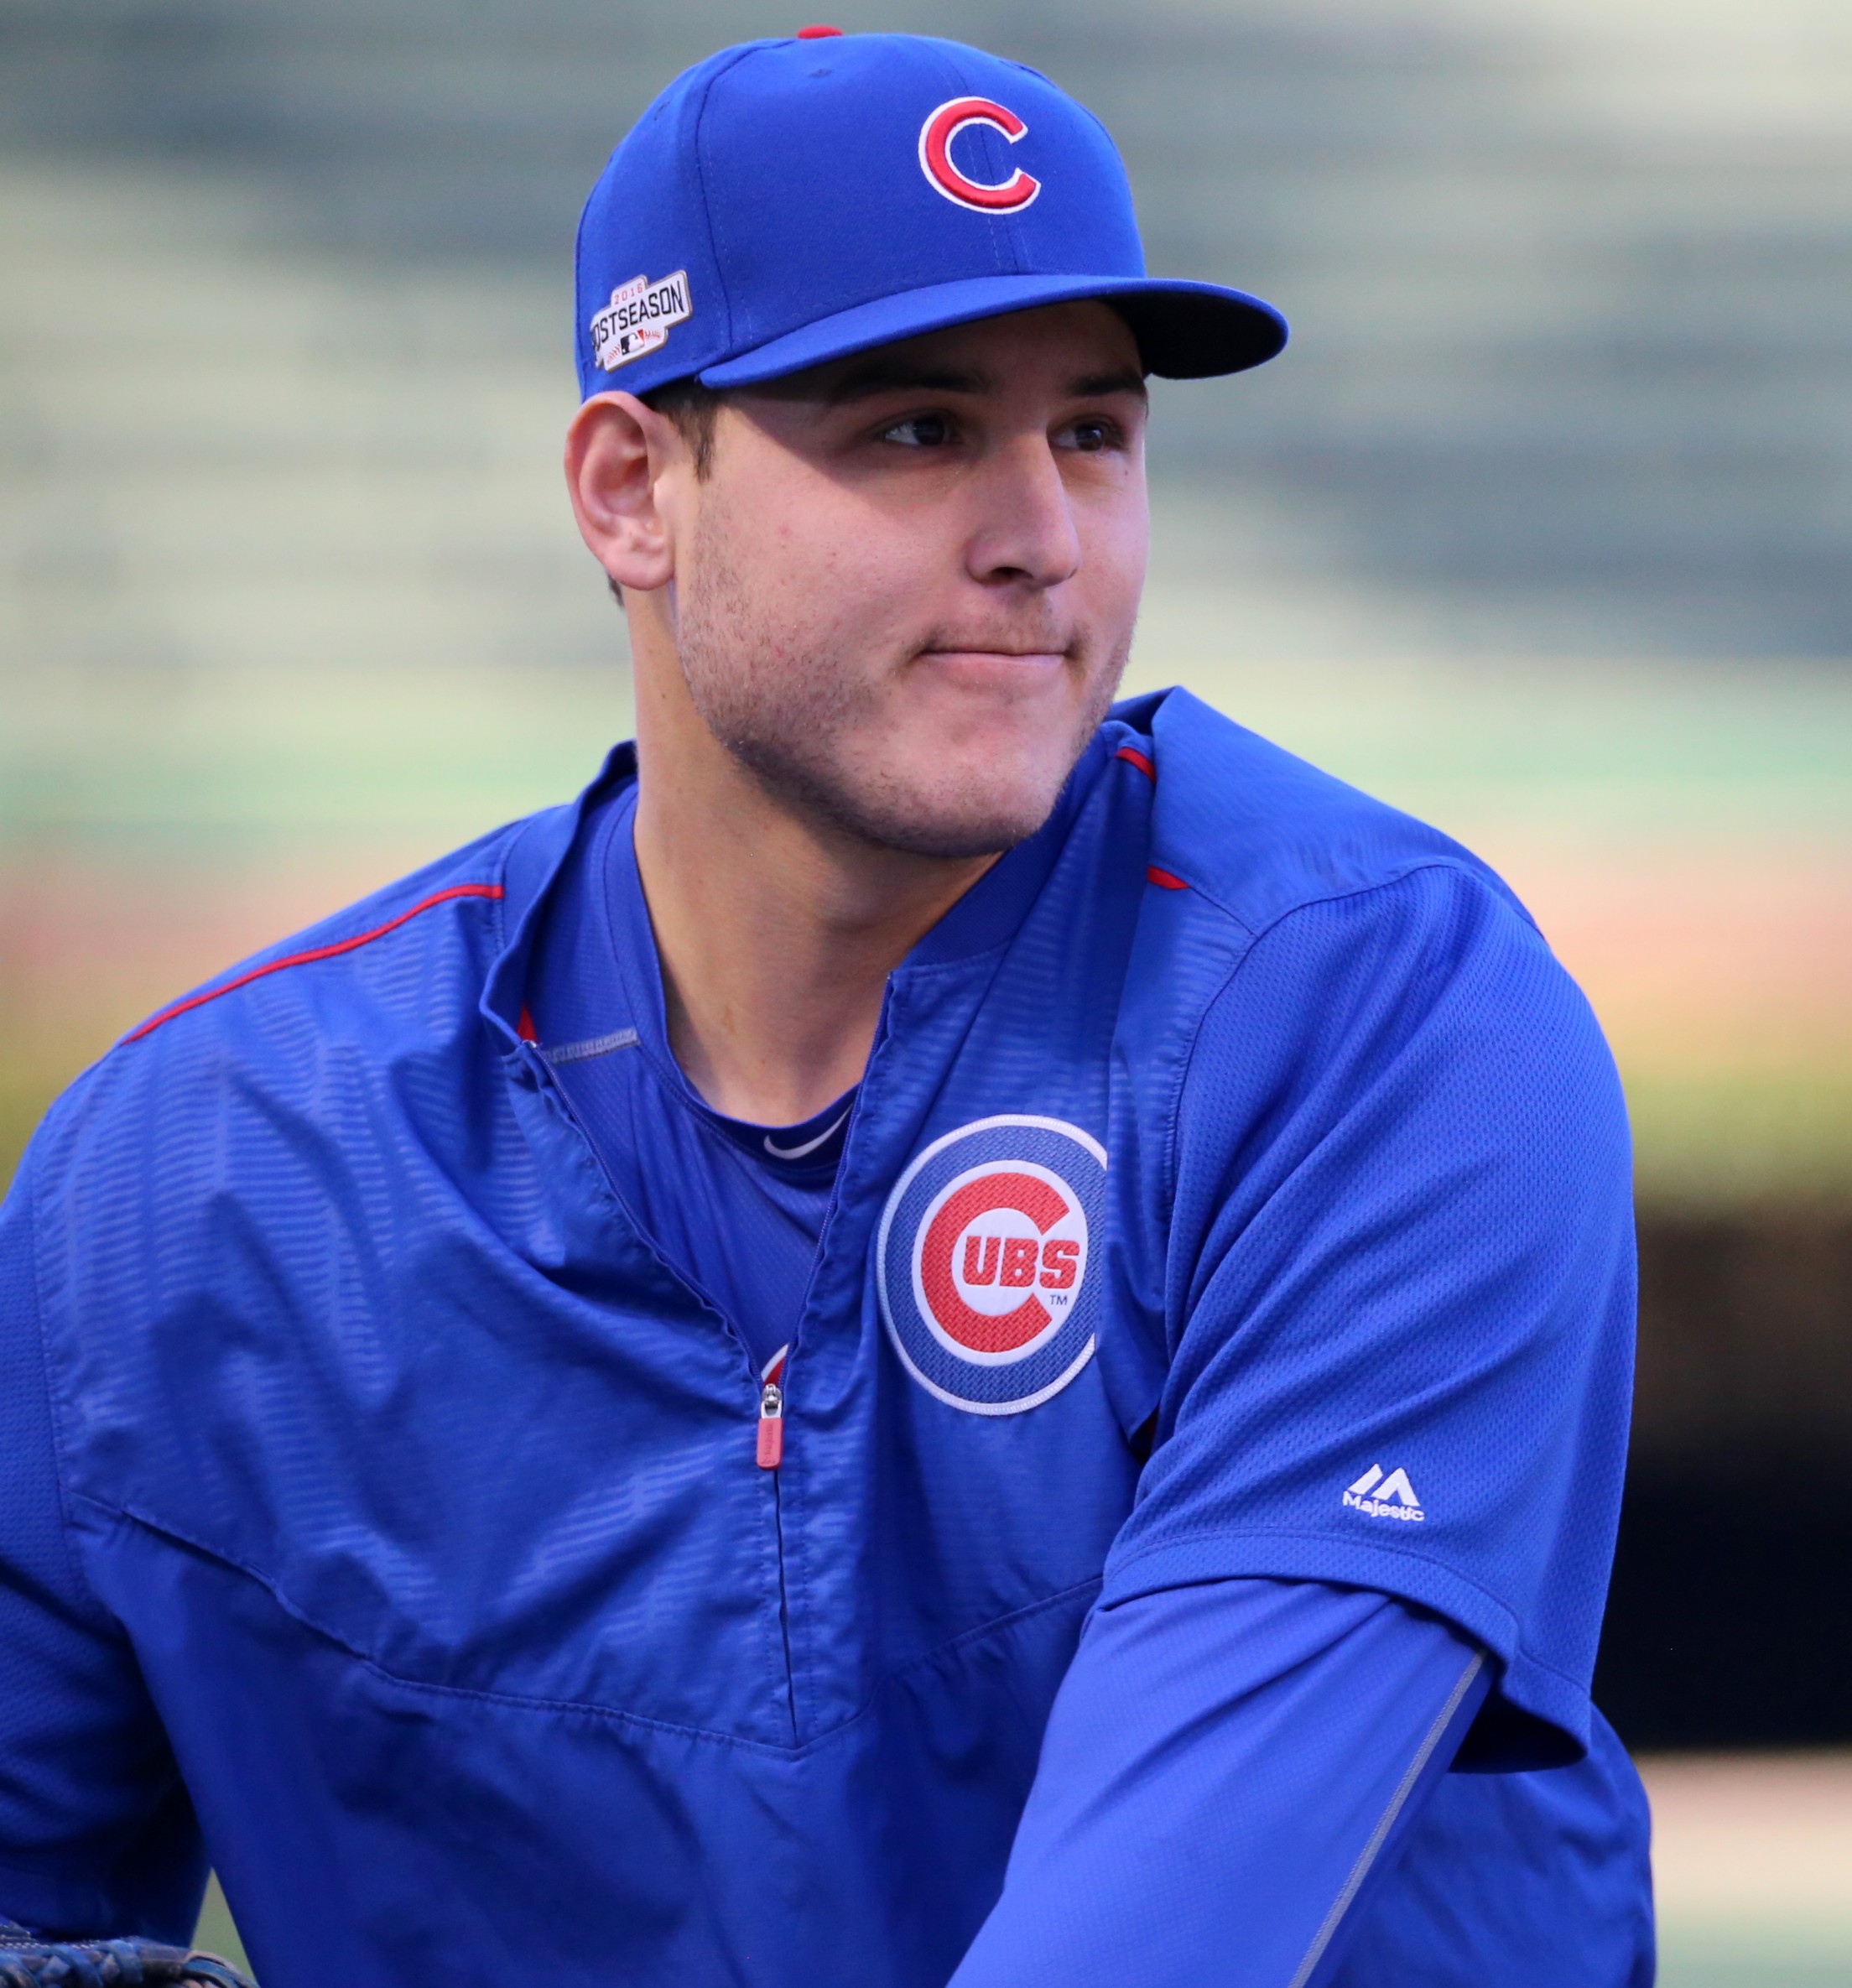 How tall is Anthony Rizzo?